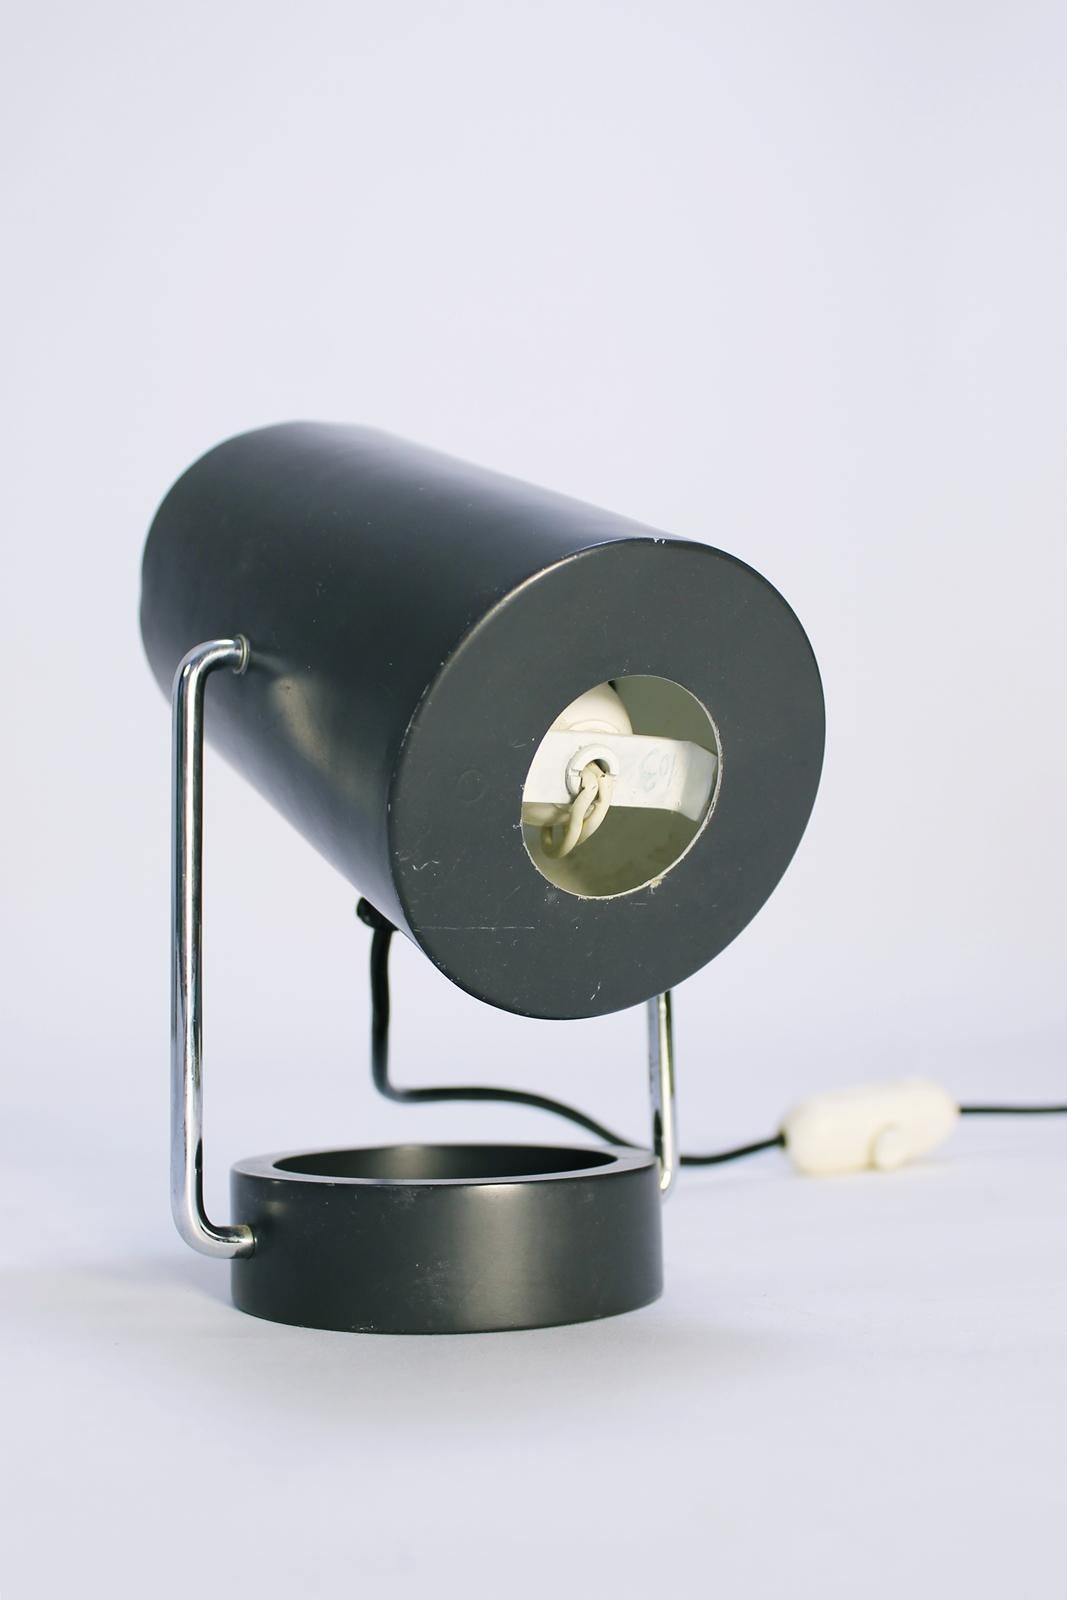 Metal Pair of Tubus Table Lamps by Tulux in Style of Baltensweiler Swiss, 1960s For Sale